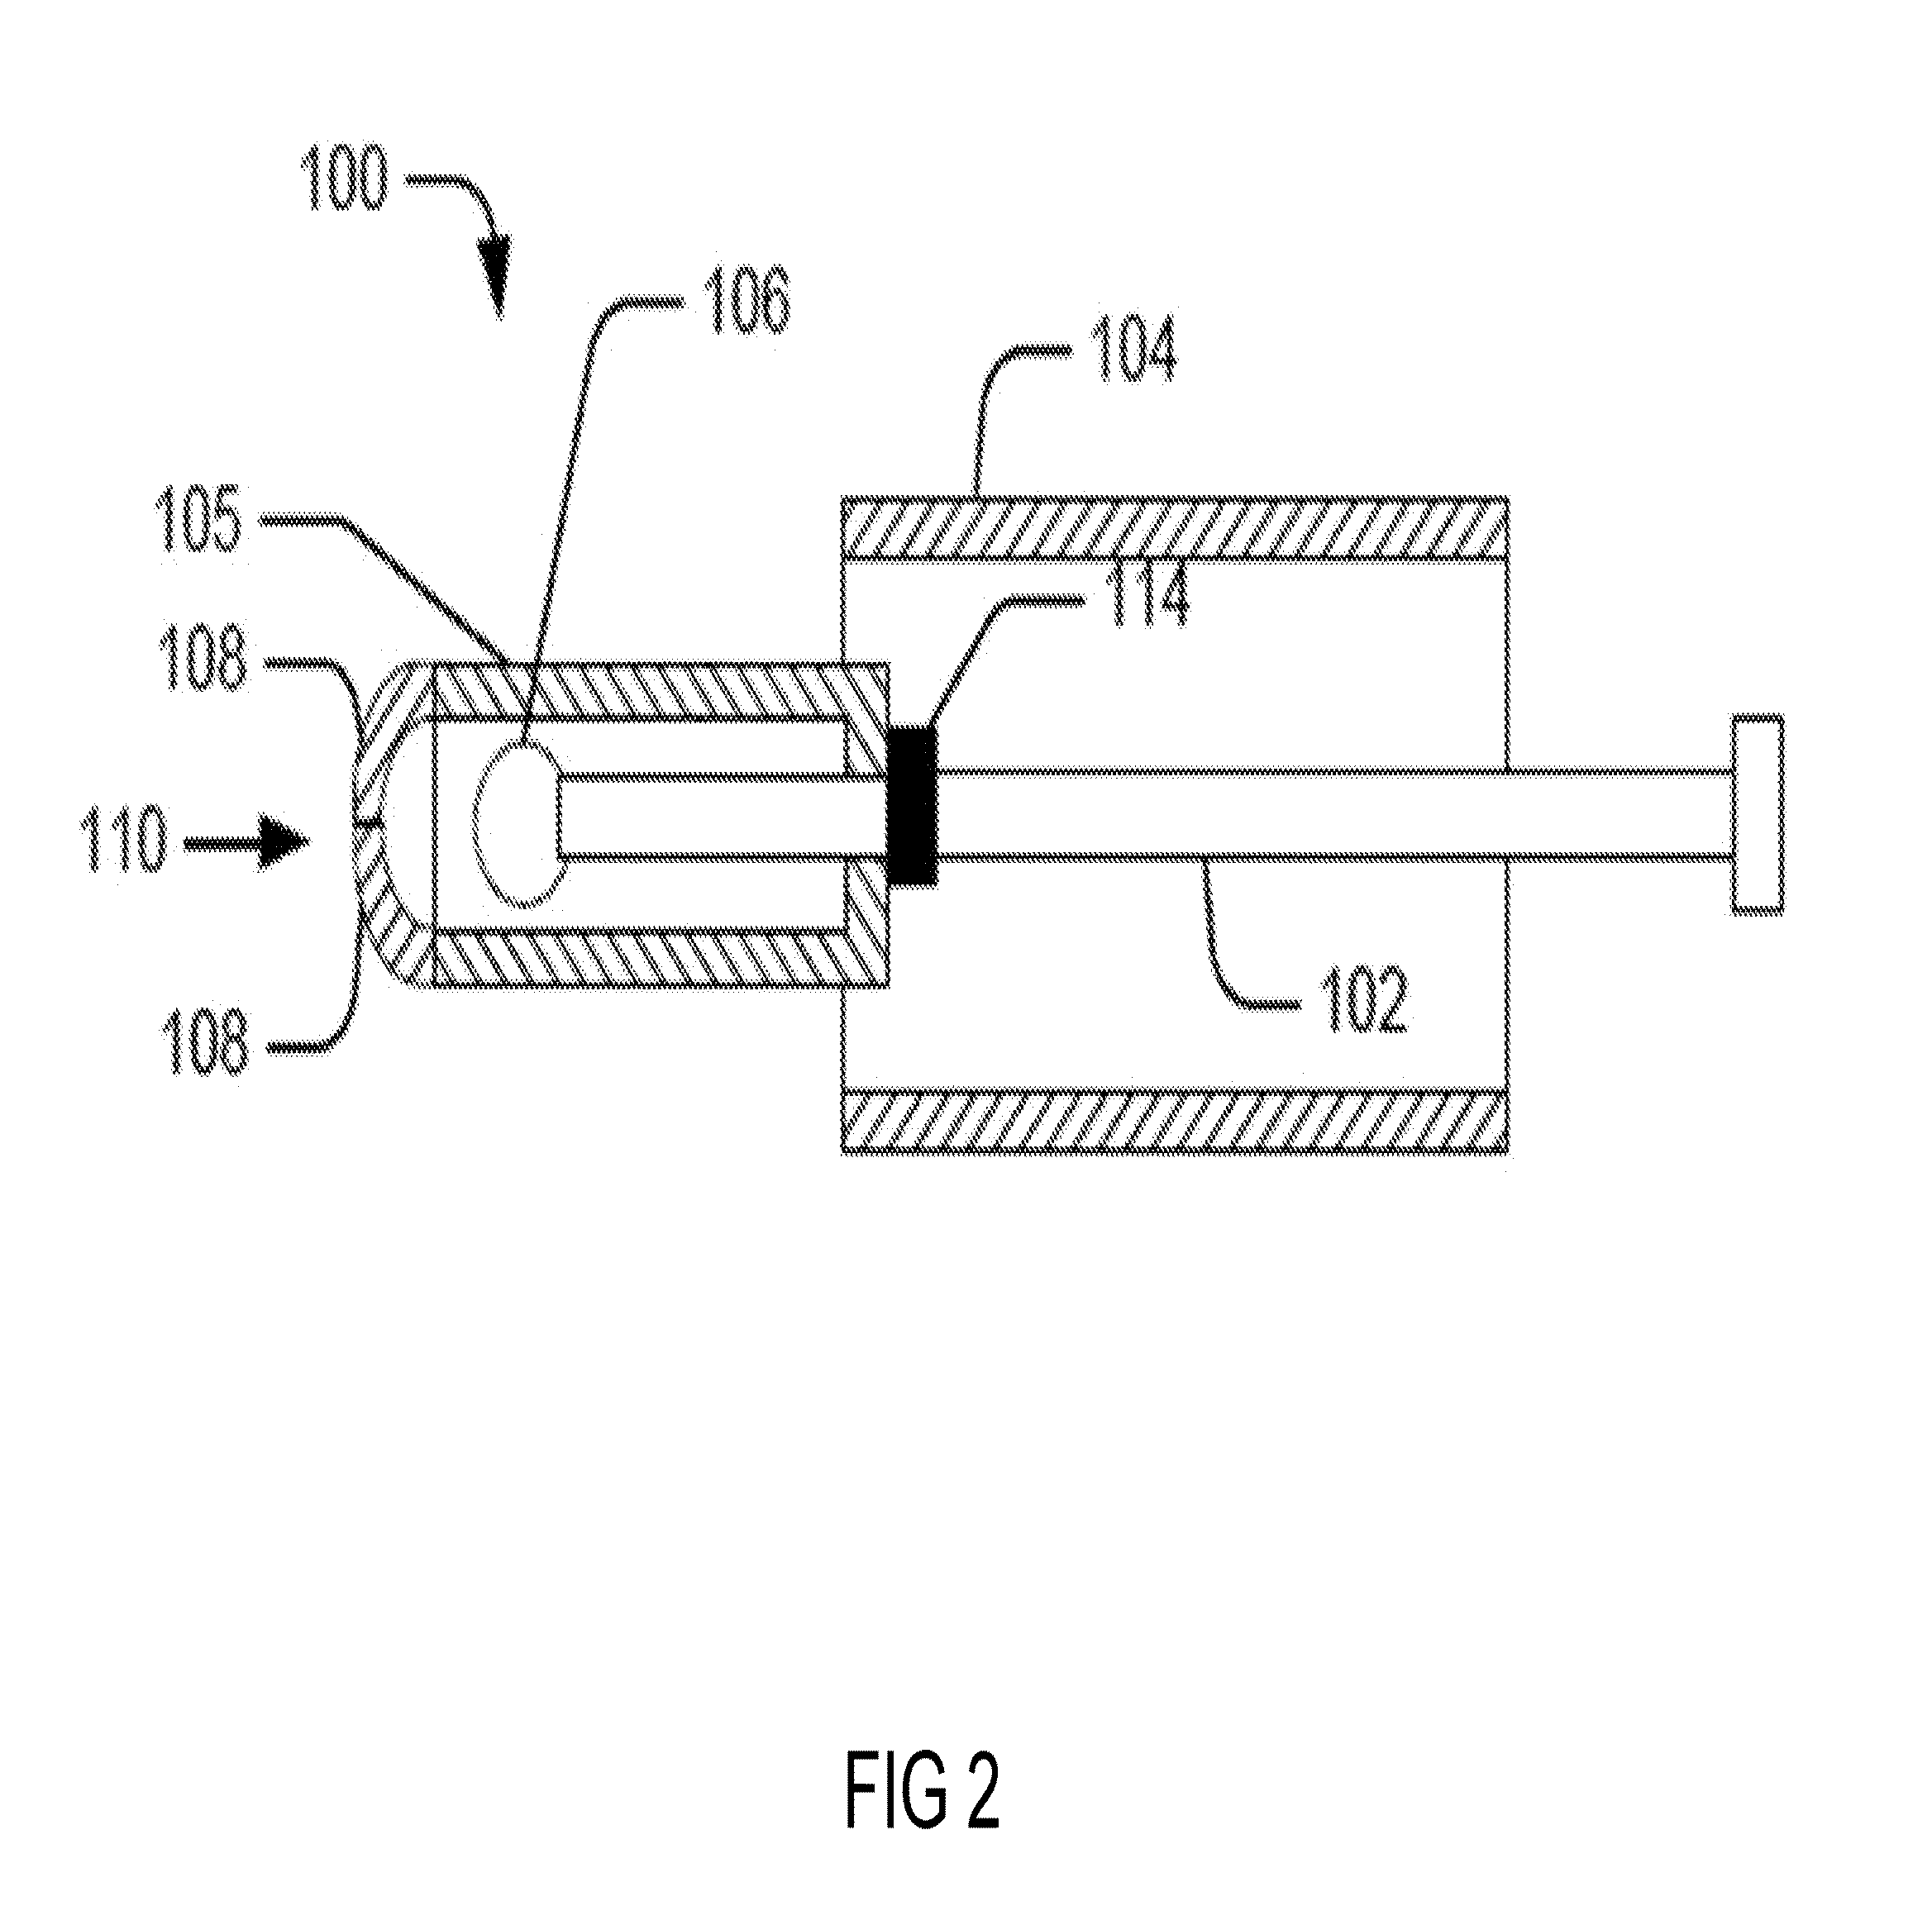 Specimen observation, collection, storage and preservation device and method of use